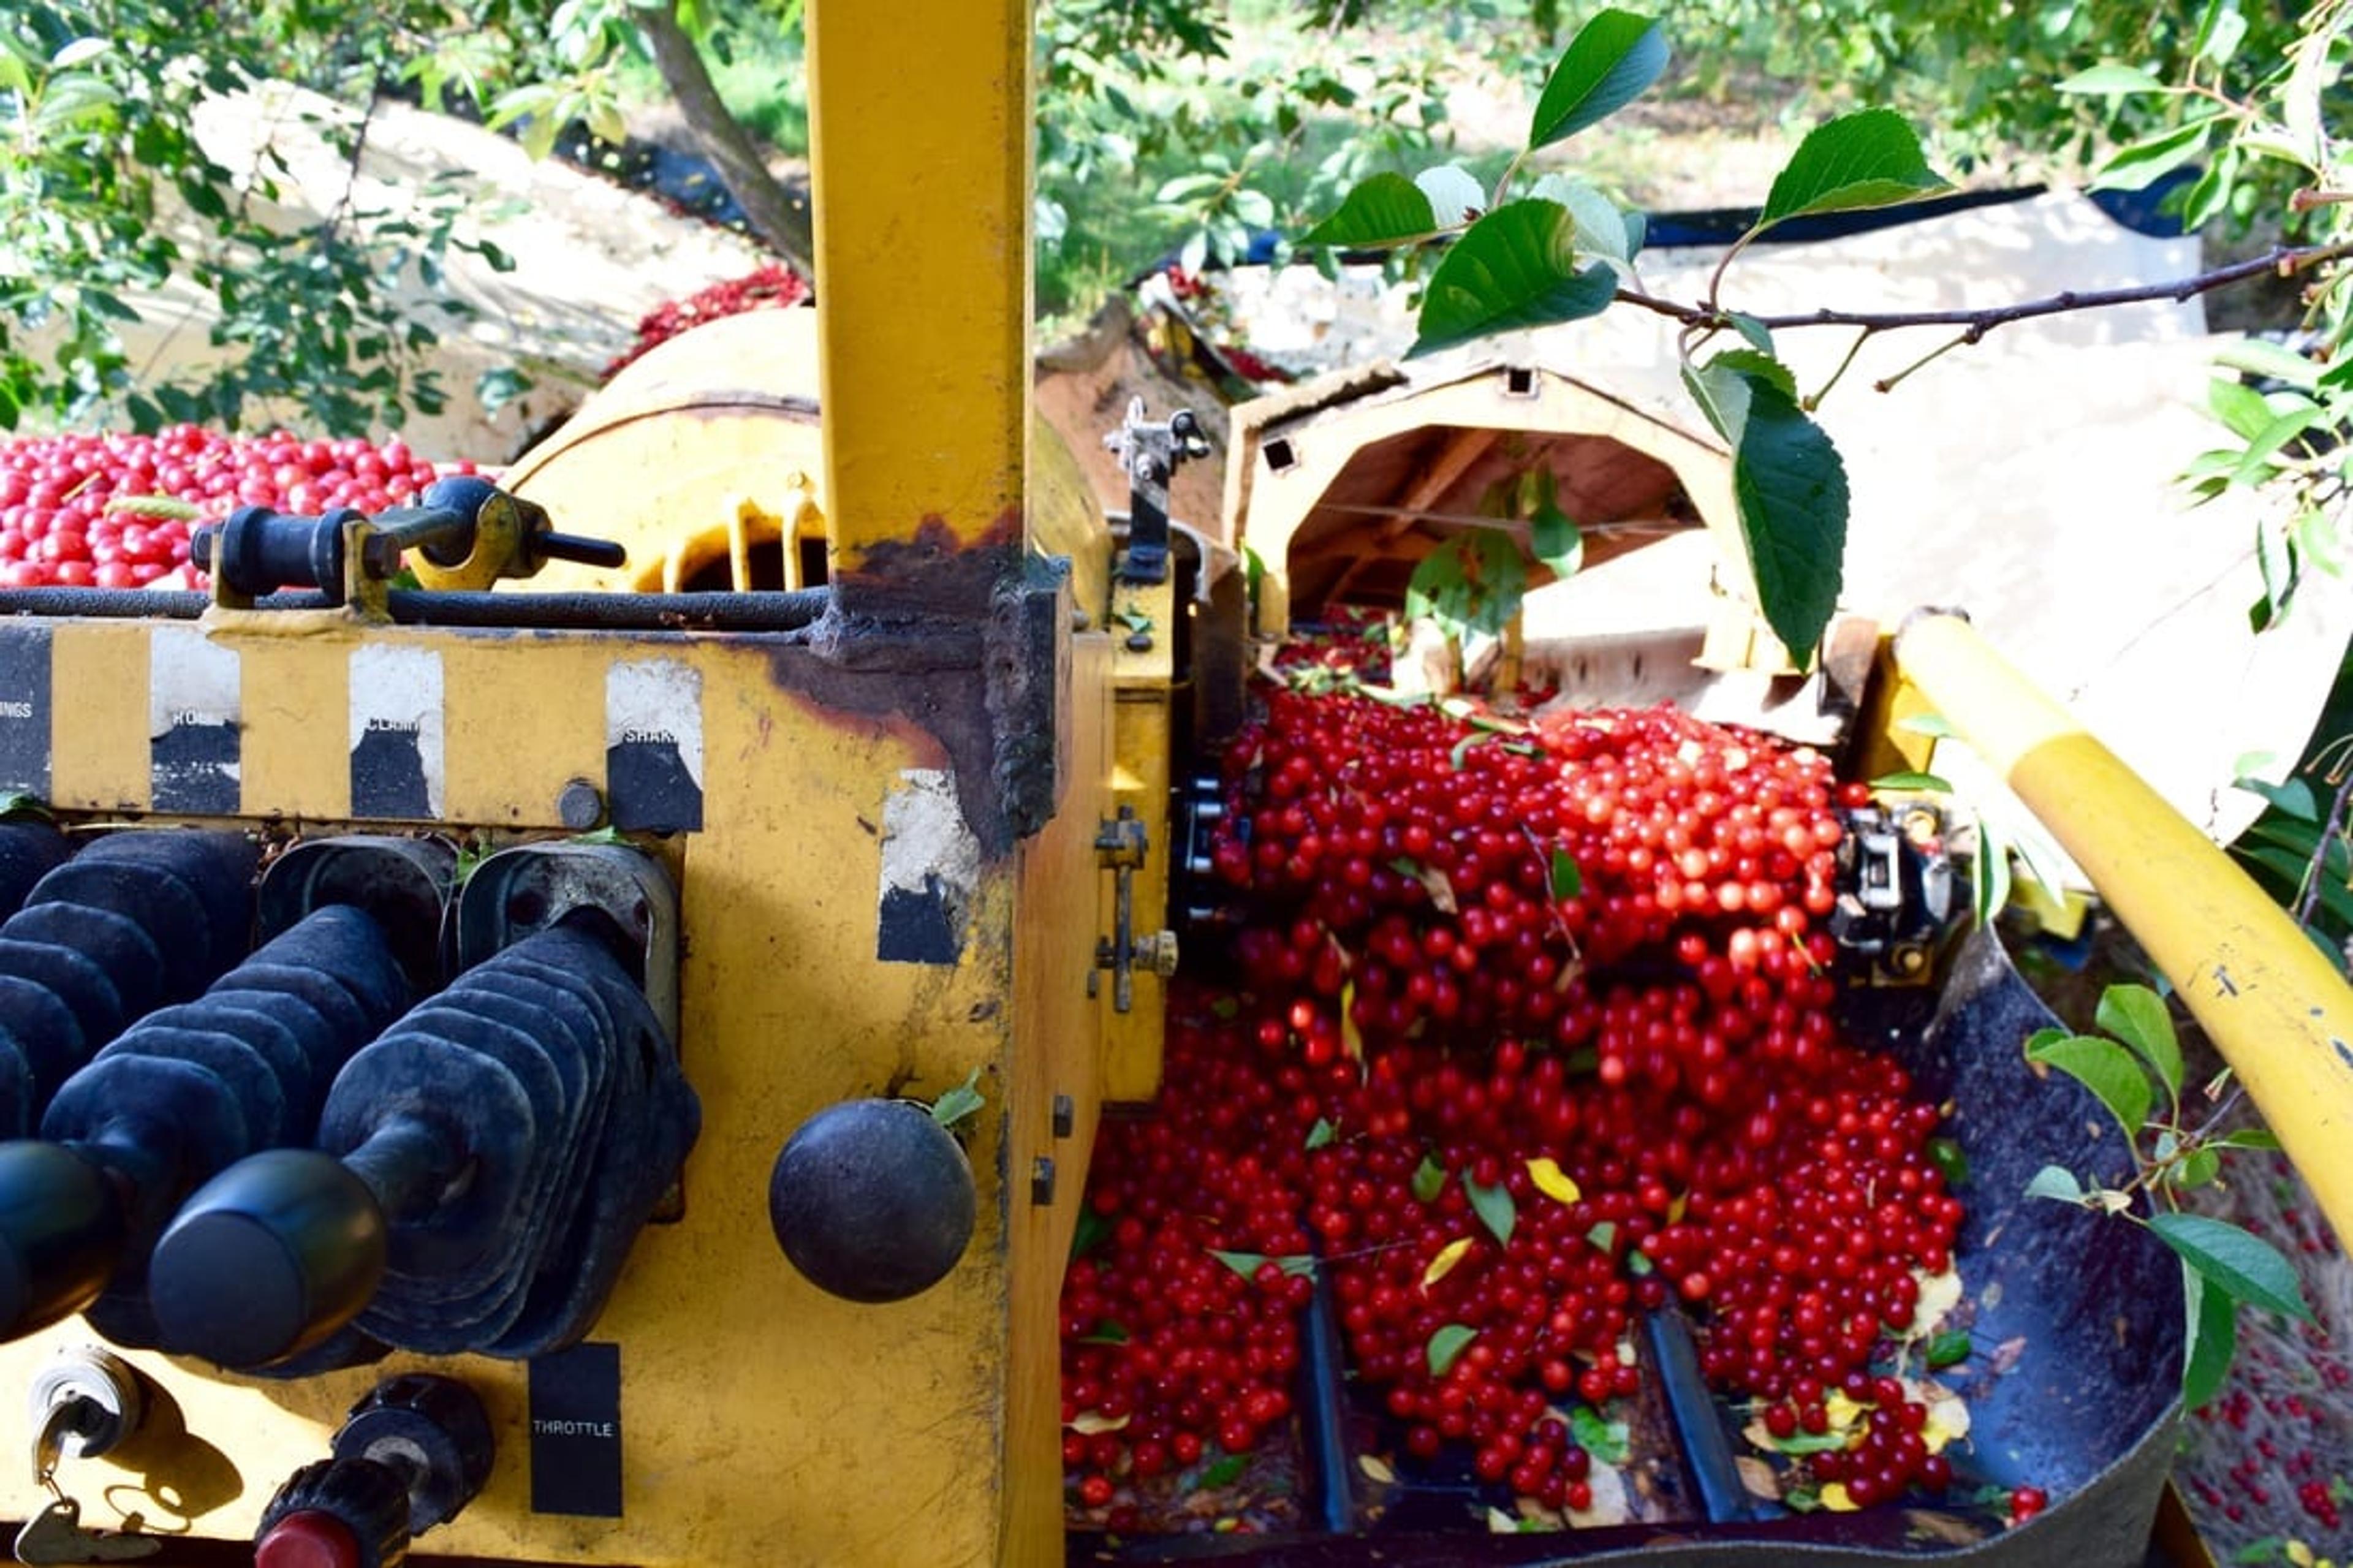 Cherries going through machinery as part of the production and harvesting process.